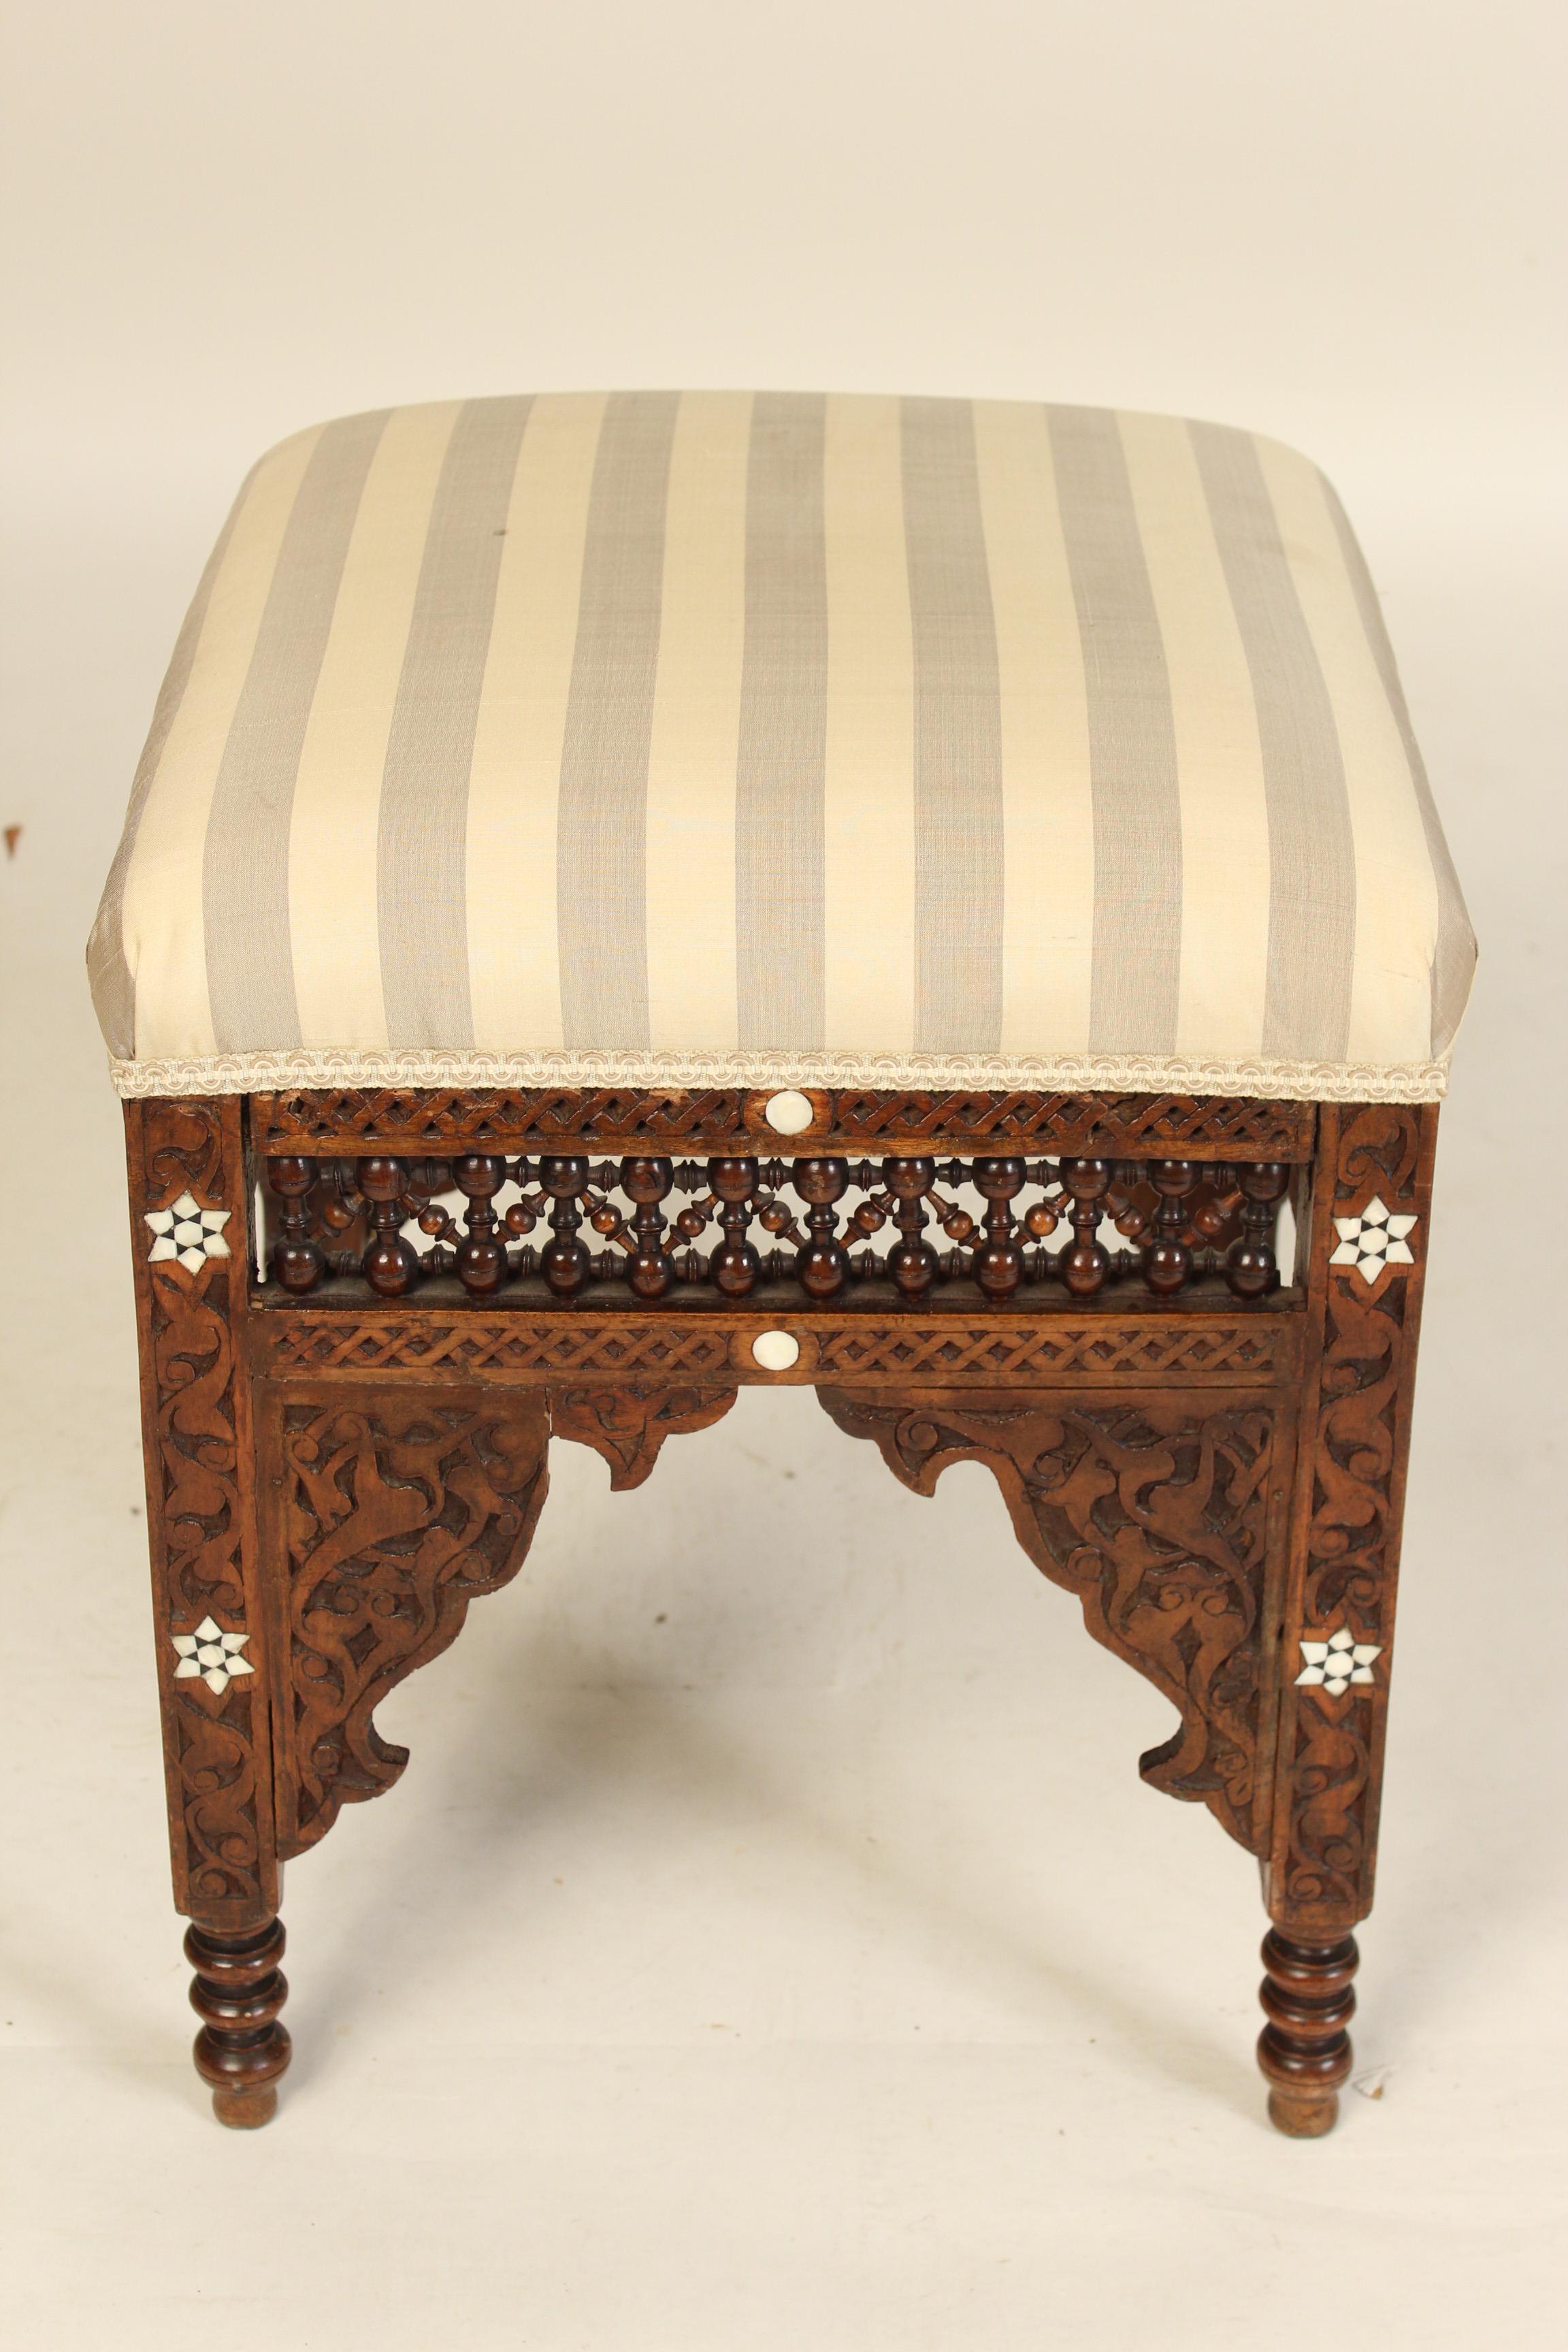 Moorish mother of pearl inlaid bench with turned and carved decorations, circa 1920s.